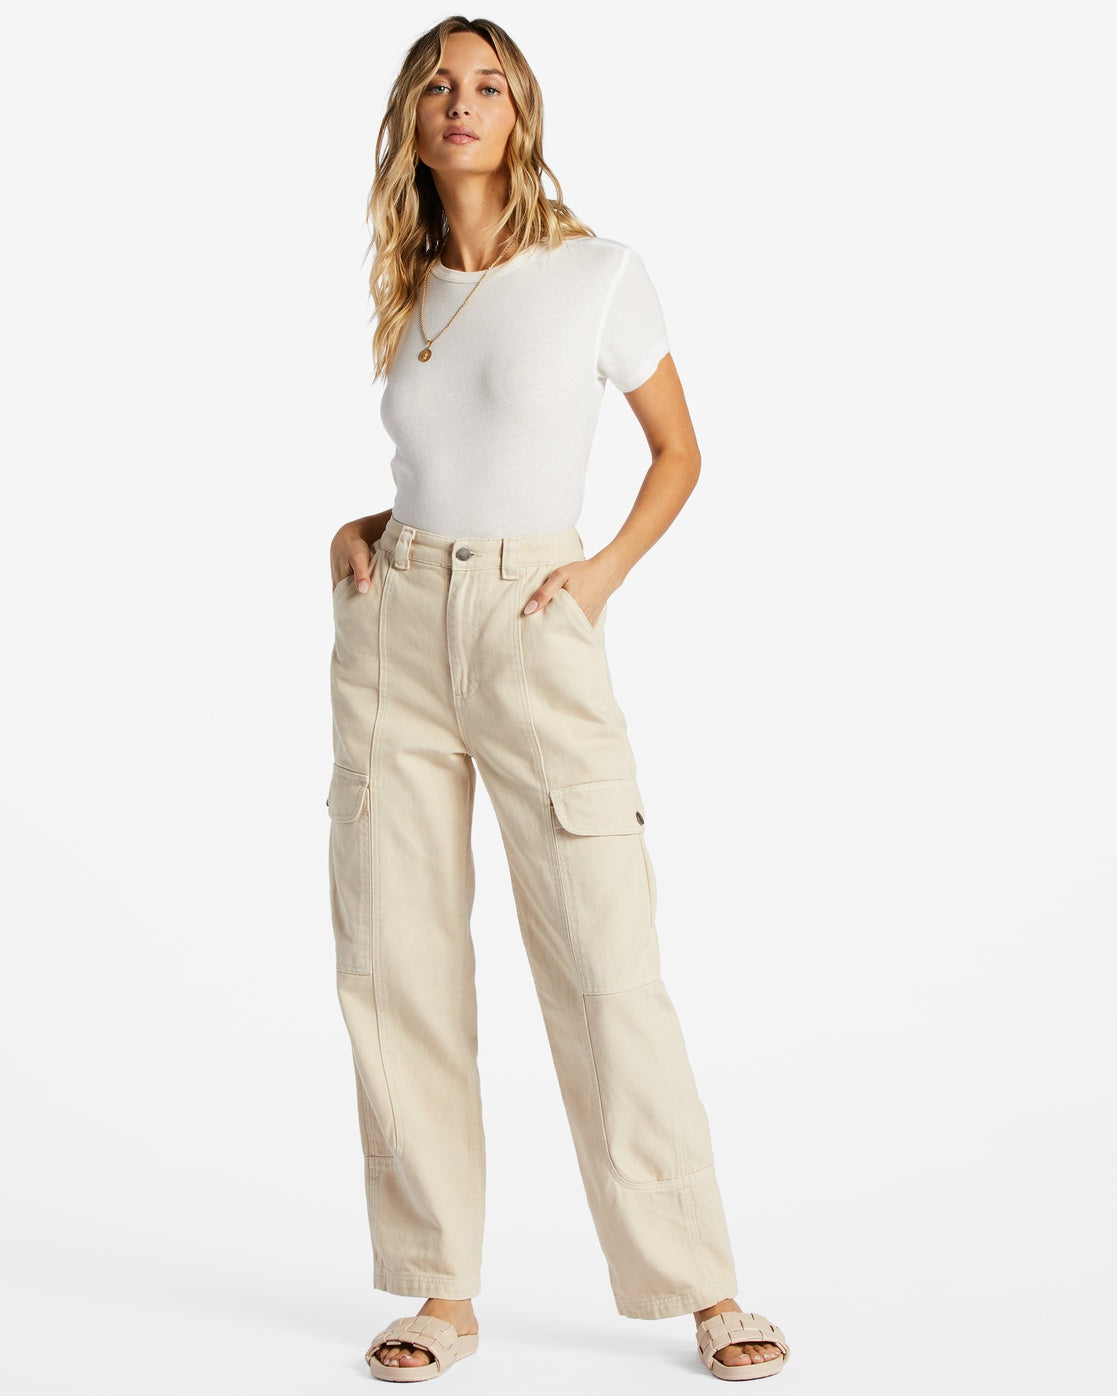 Wall To Wall Denim Cargo Pants – Stcroixsurf